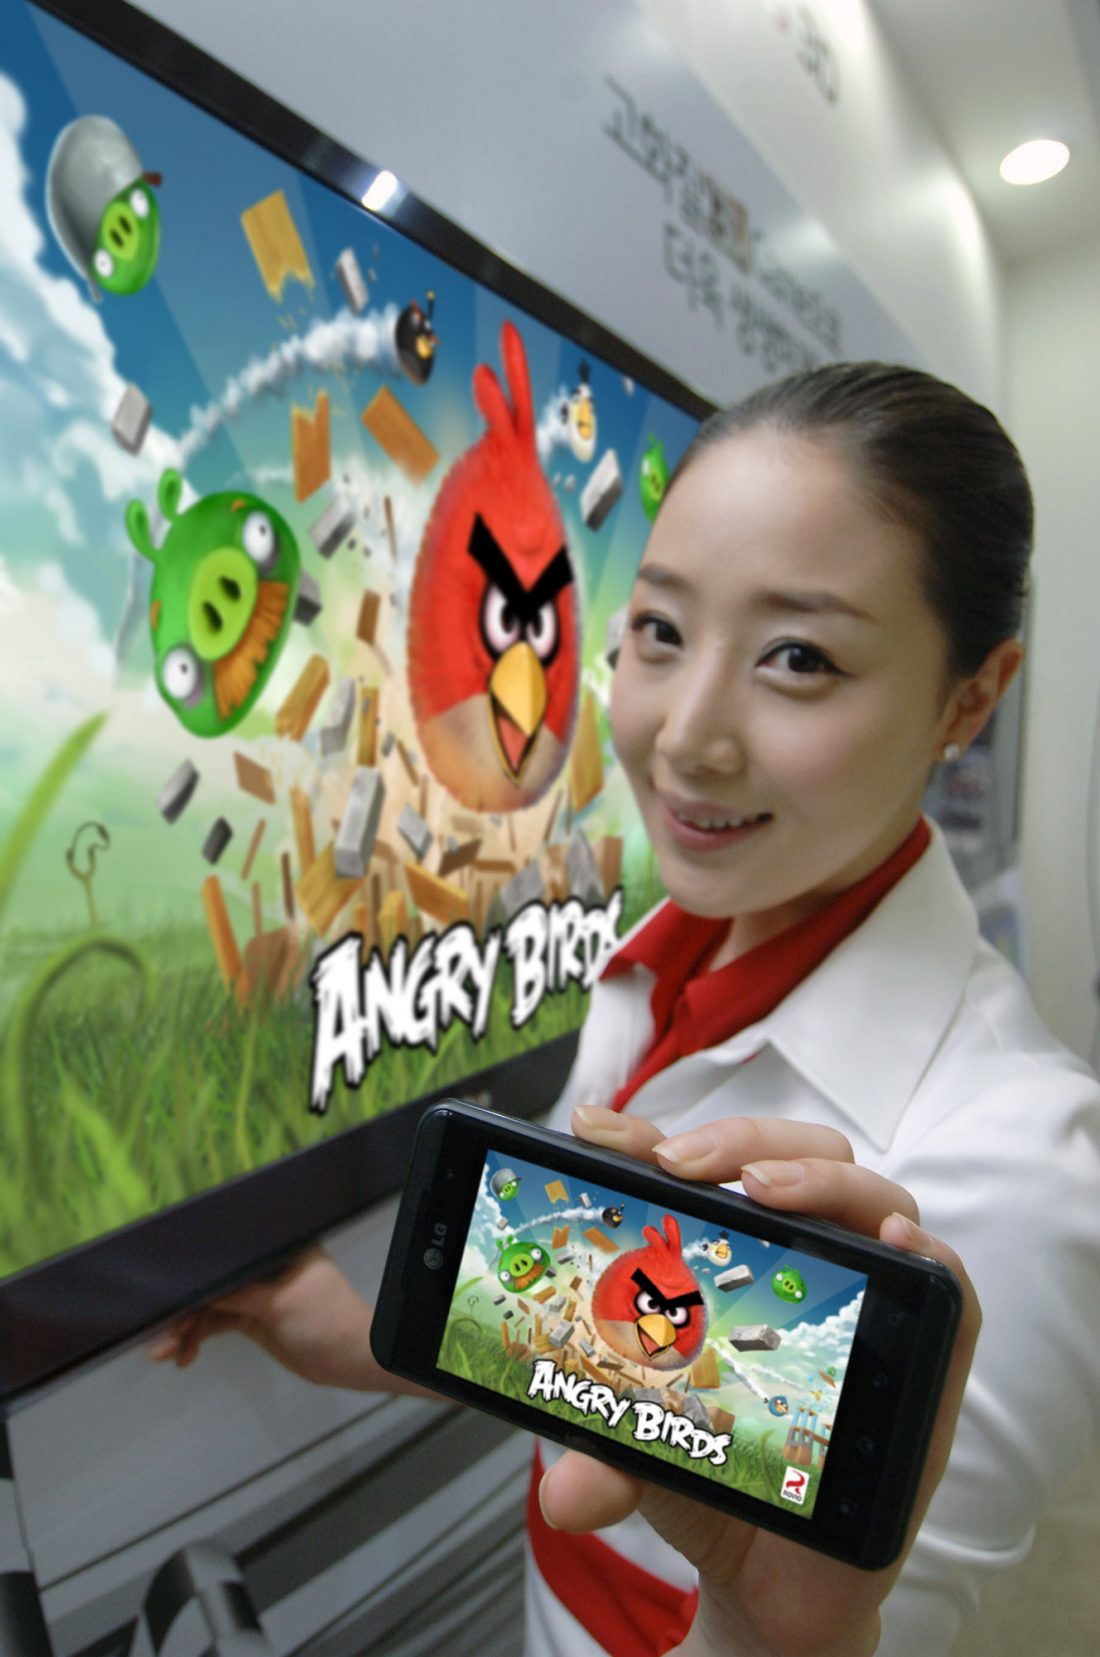 A close view of a model holding an OPTIMUS SERIES SMARTPHONE with ANGRY BIRDS RIO on the screen